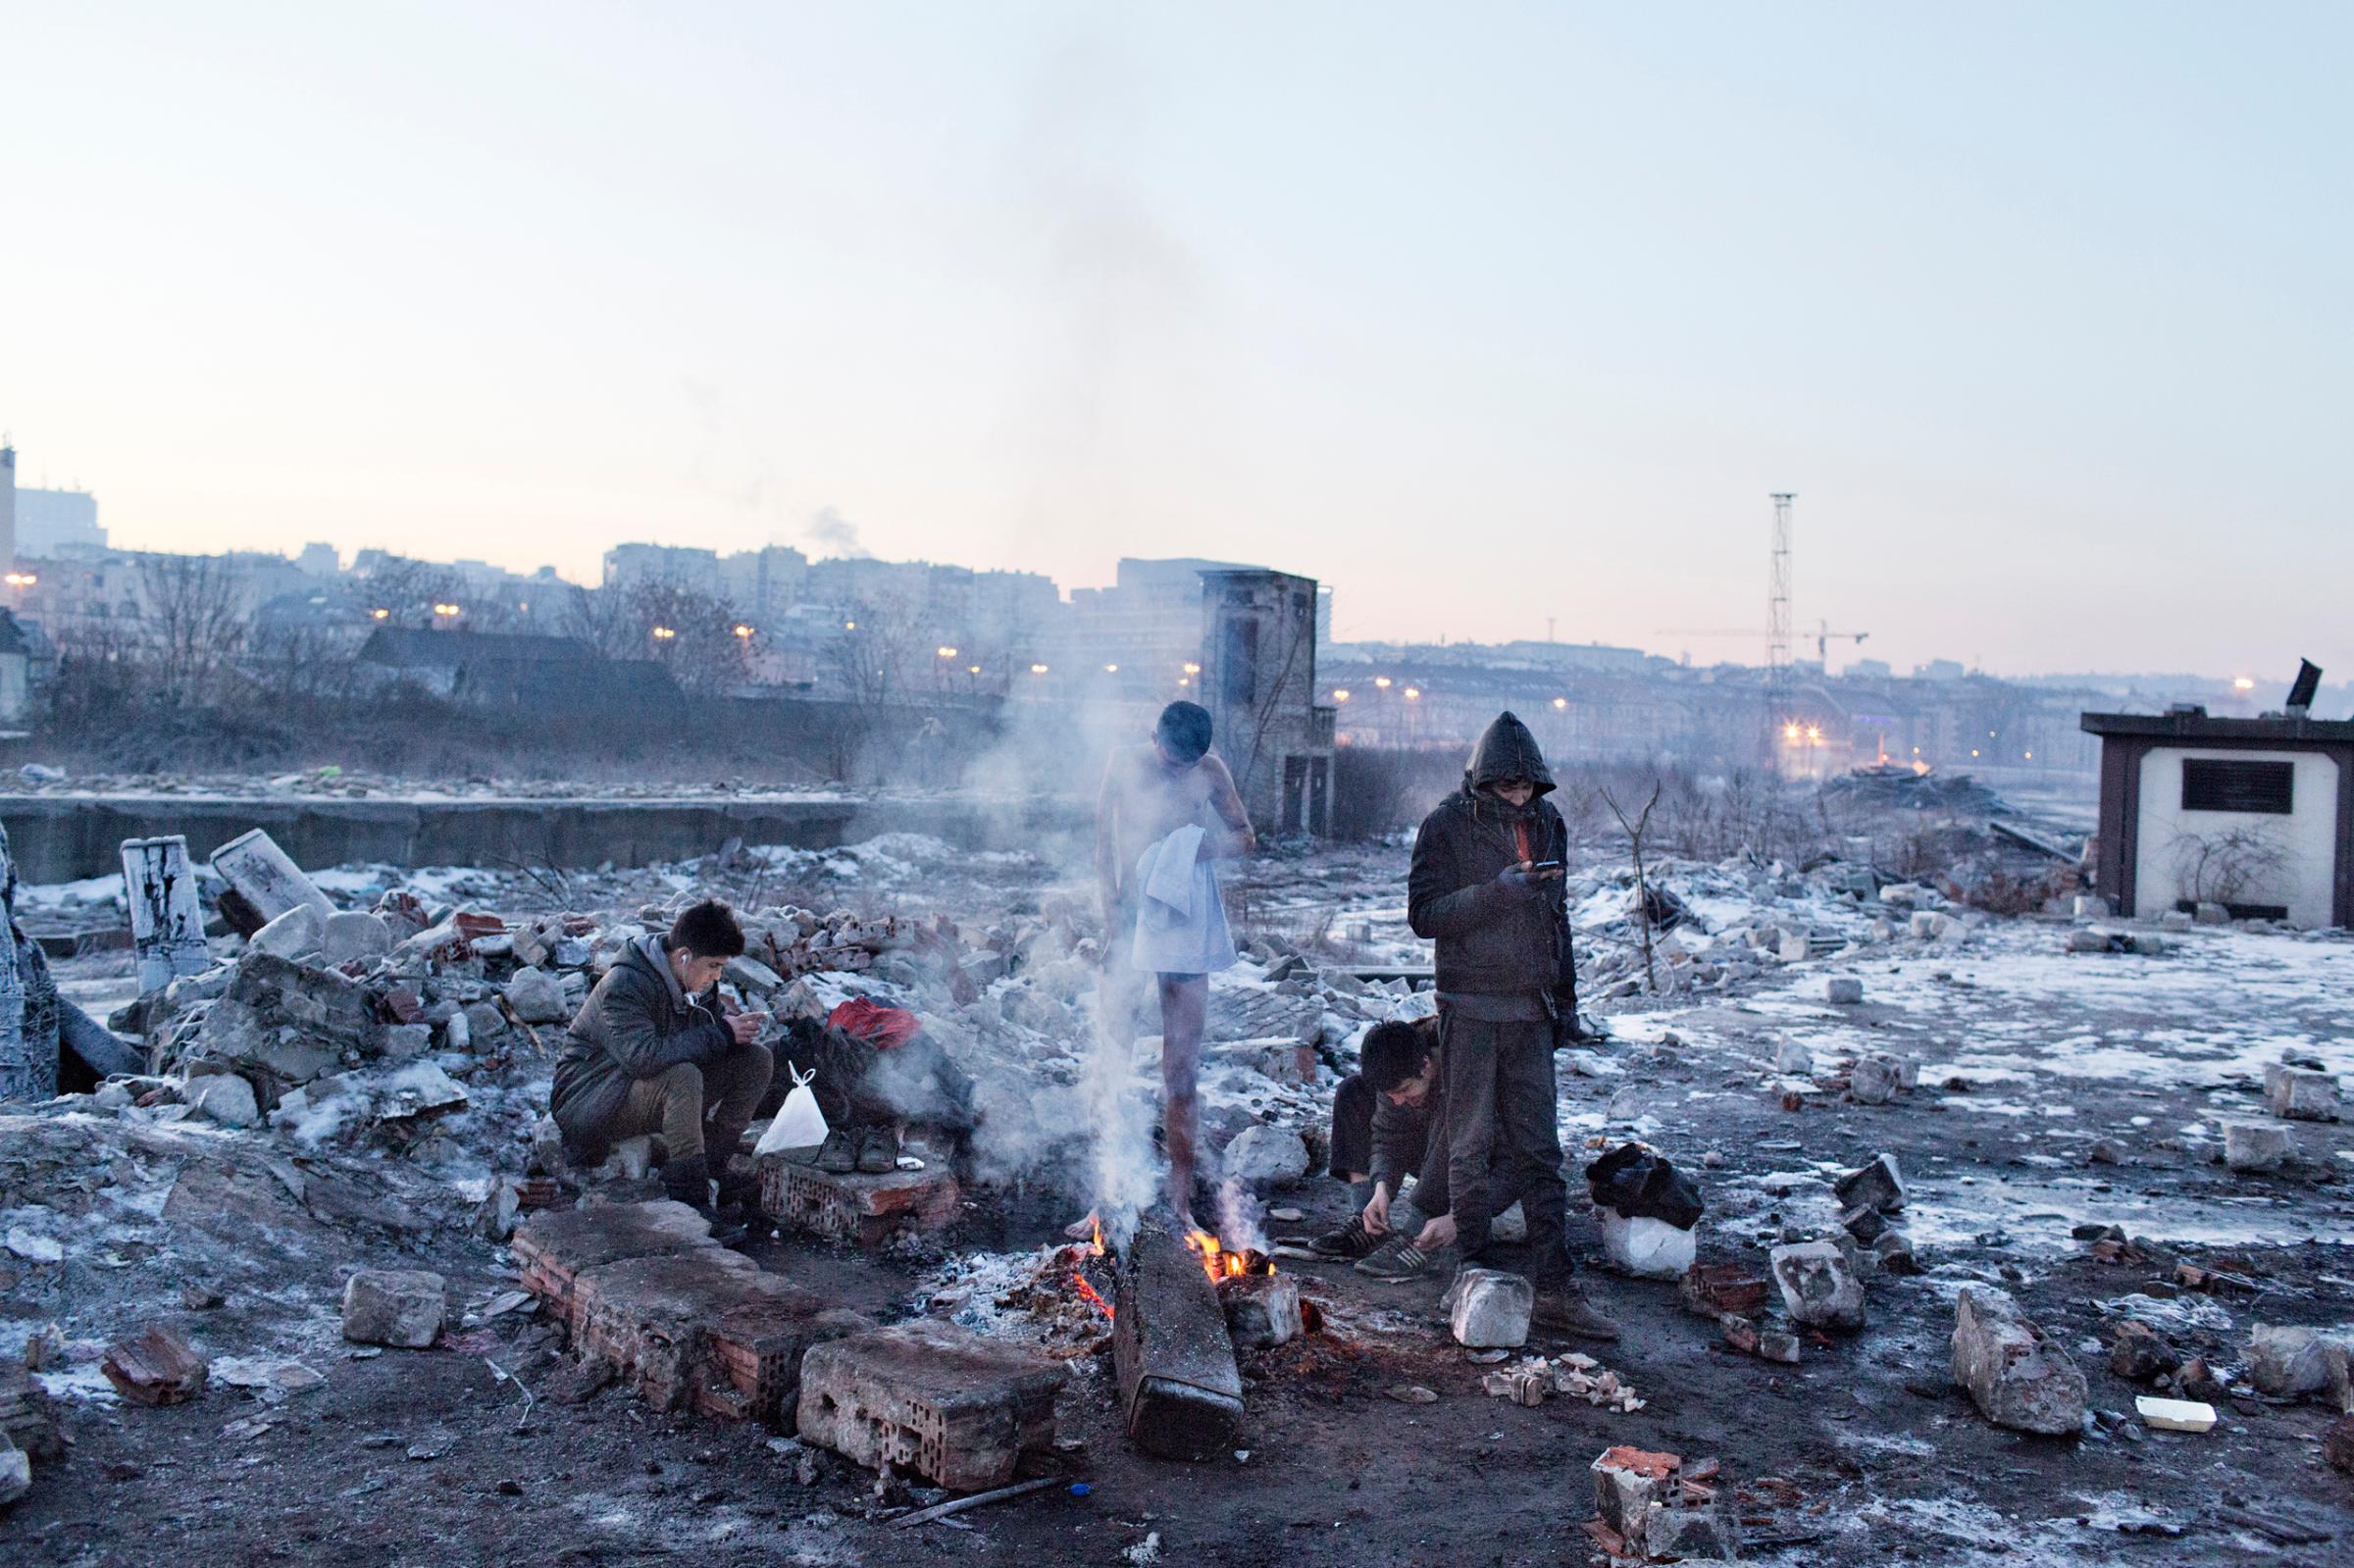 A group of unaccompanied minors form afghanistan , include a boy with disability, to keeps warm by starting a makeshift fire near the train station of Belgrade, Jan 15, 2017.